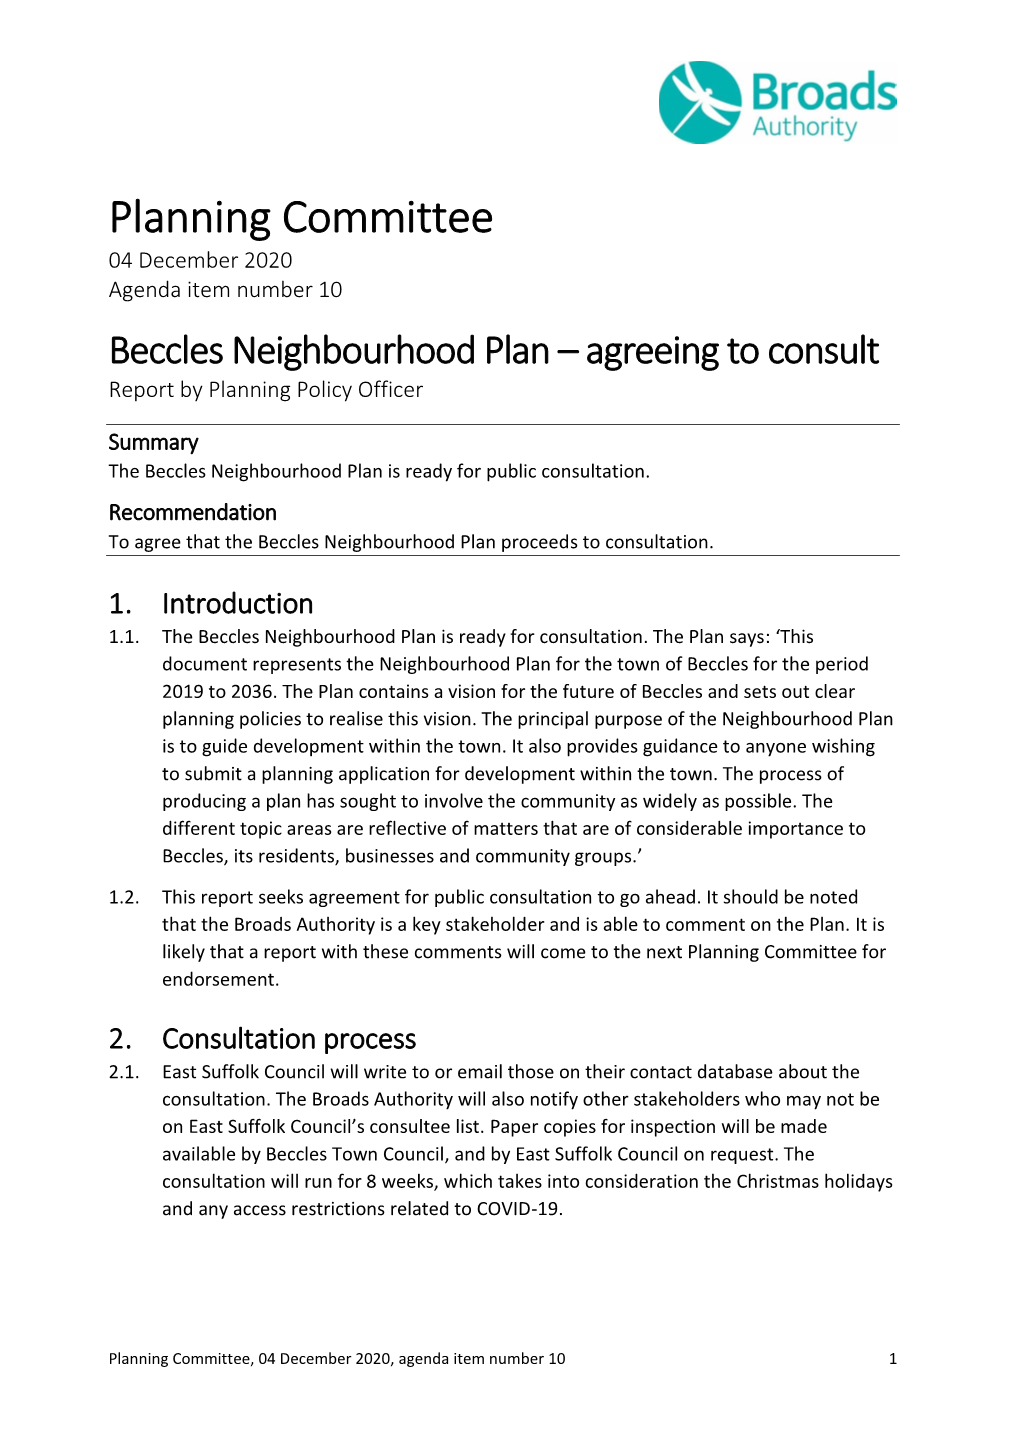 Beccles Neighbourhood Plan – Agreeing to Consult Report by Planning Policy Officer